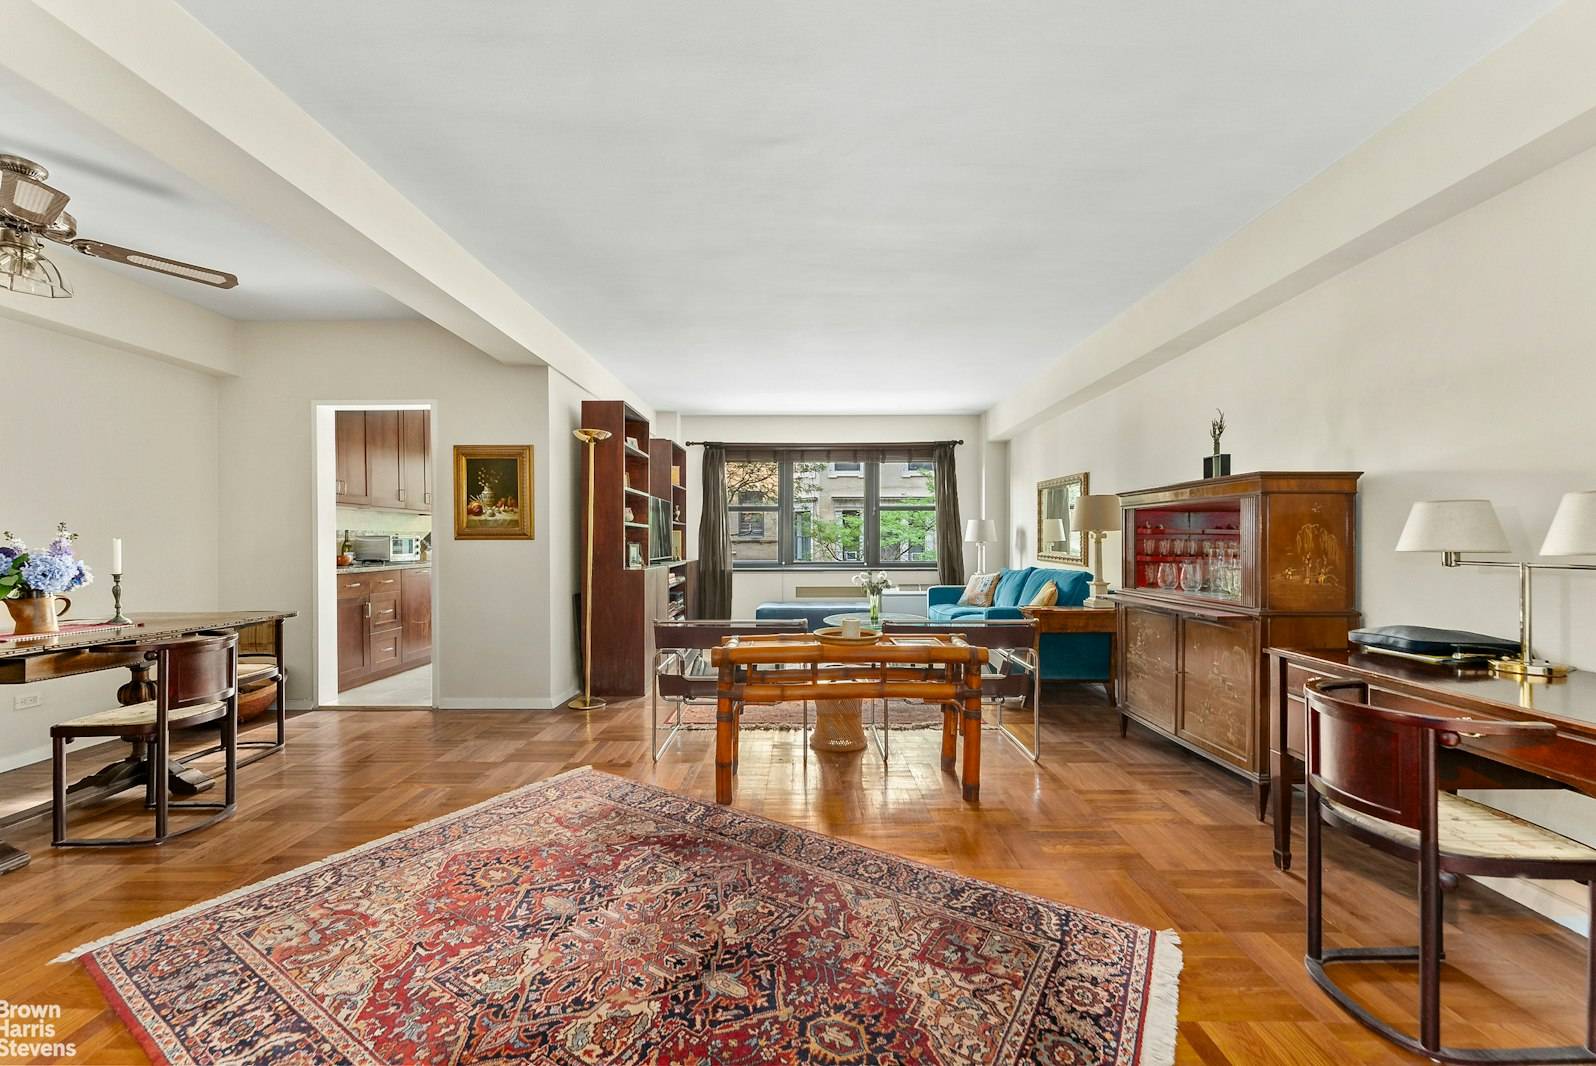 73 WEA RSD FULL SERVICE ENORMOUS, RENOVATED amp ; QUIET 1 BEDROOMThis serene, sprawling apartment faces north over West 74th Street, a quiet, tree lined street offering very pleasant views ...